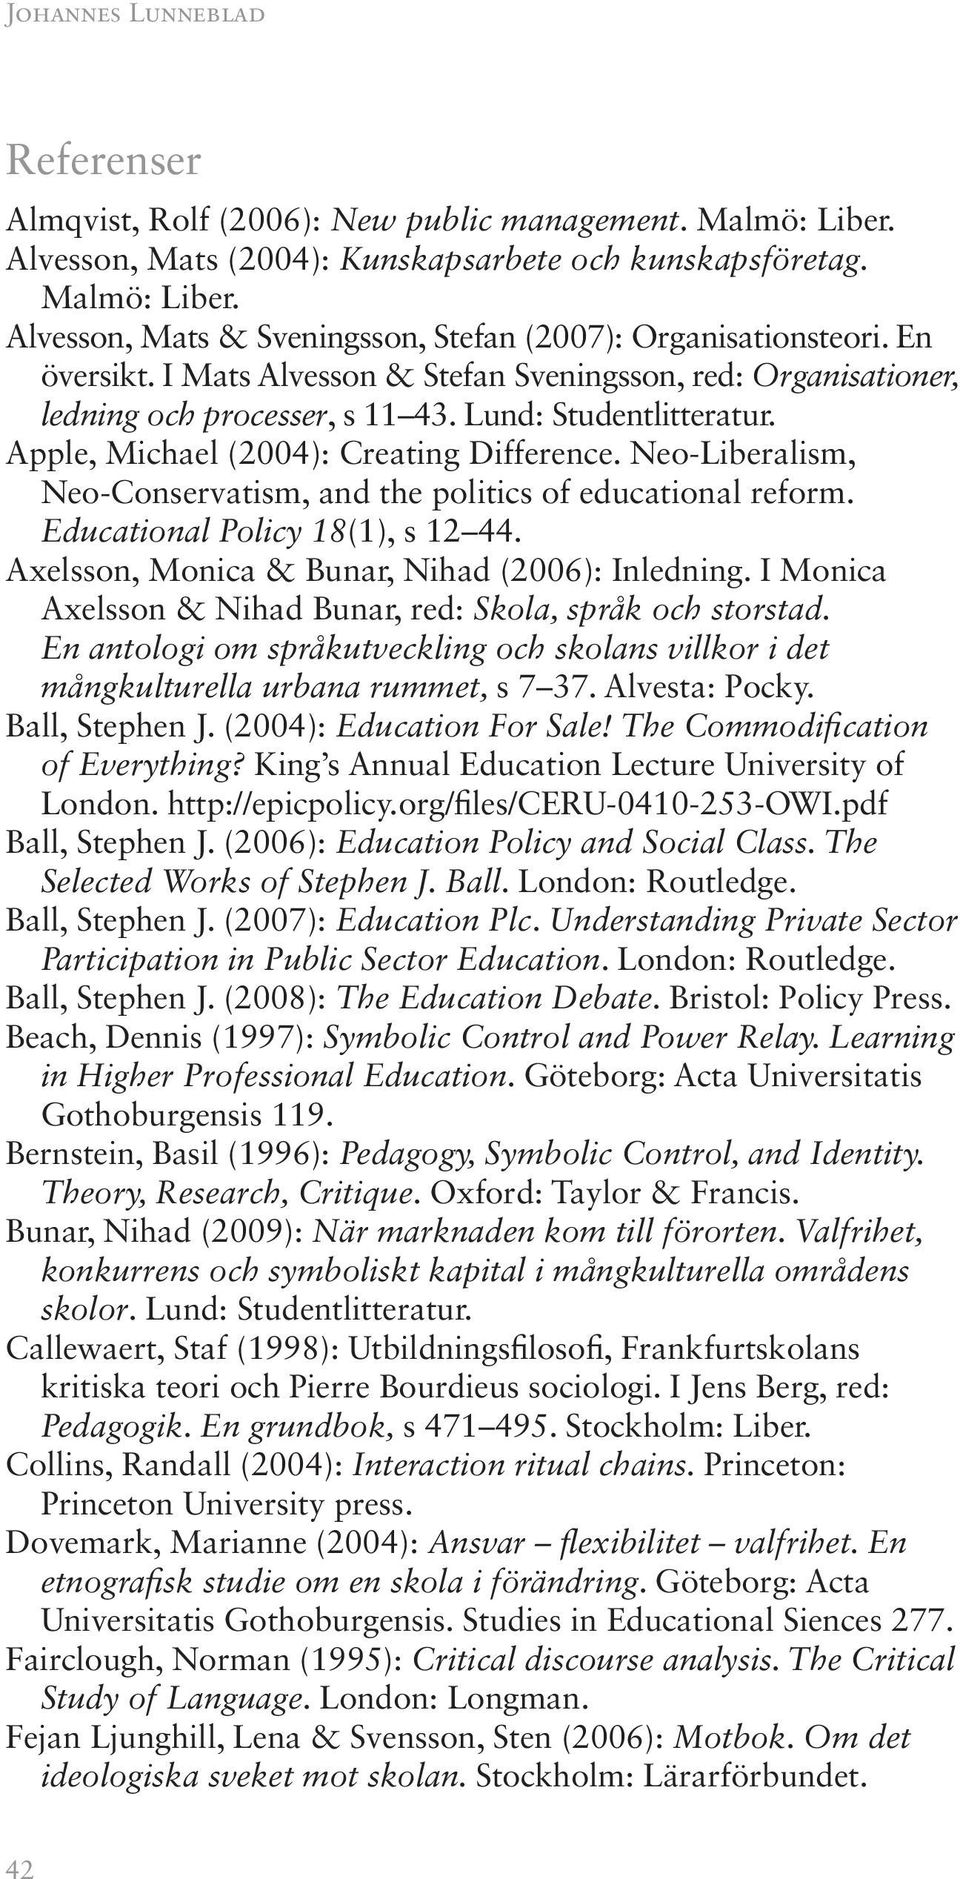 Neo-Liberalism, Neo-Conservatism, and the politics of educational reform. Educational Policy 18(1), s 12 44. Axelsson, Monica & Bunar, Nihad (2006): Inledning.